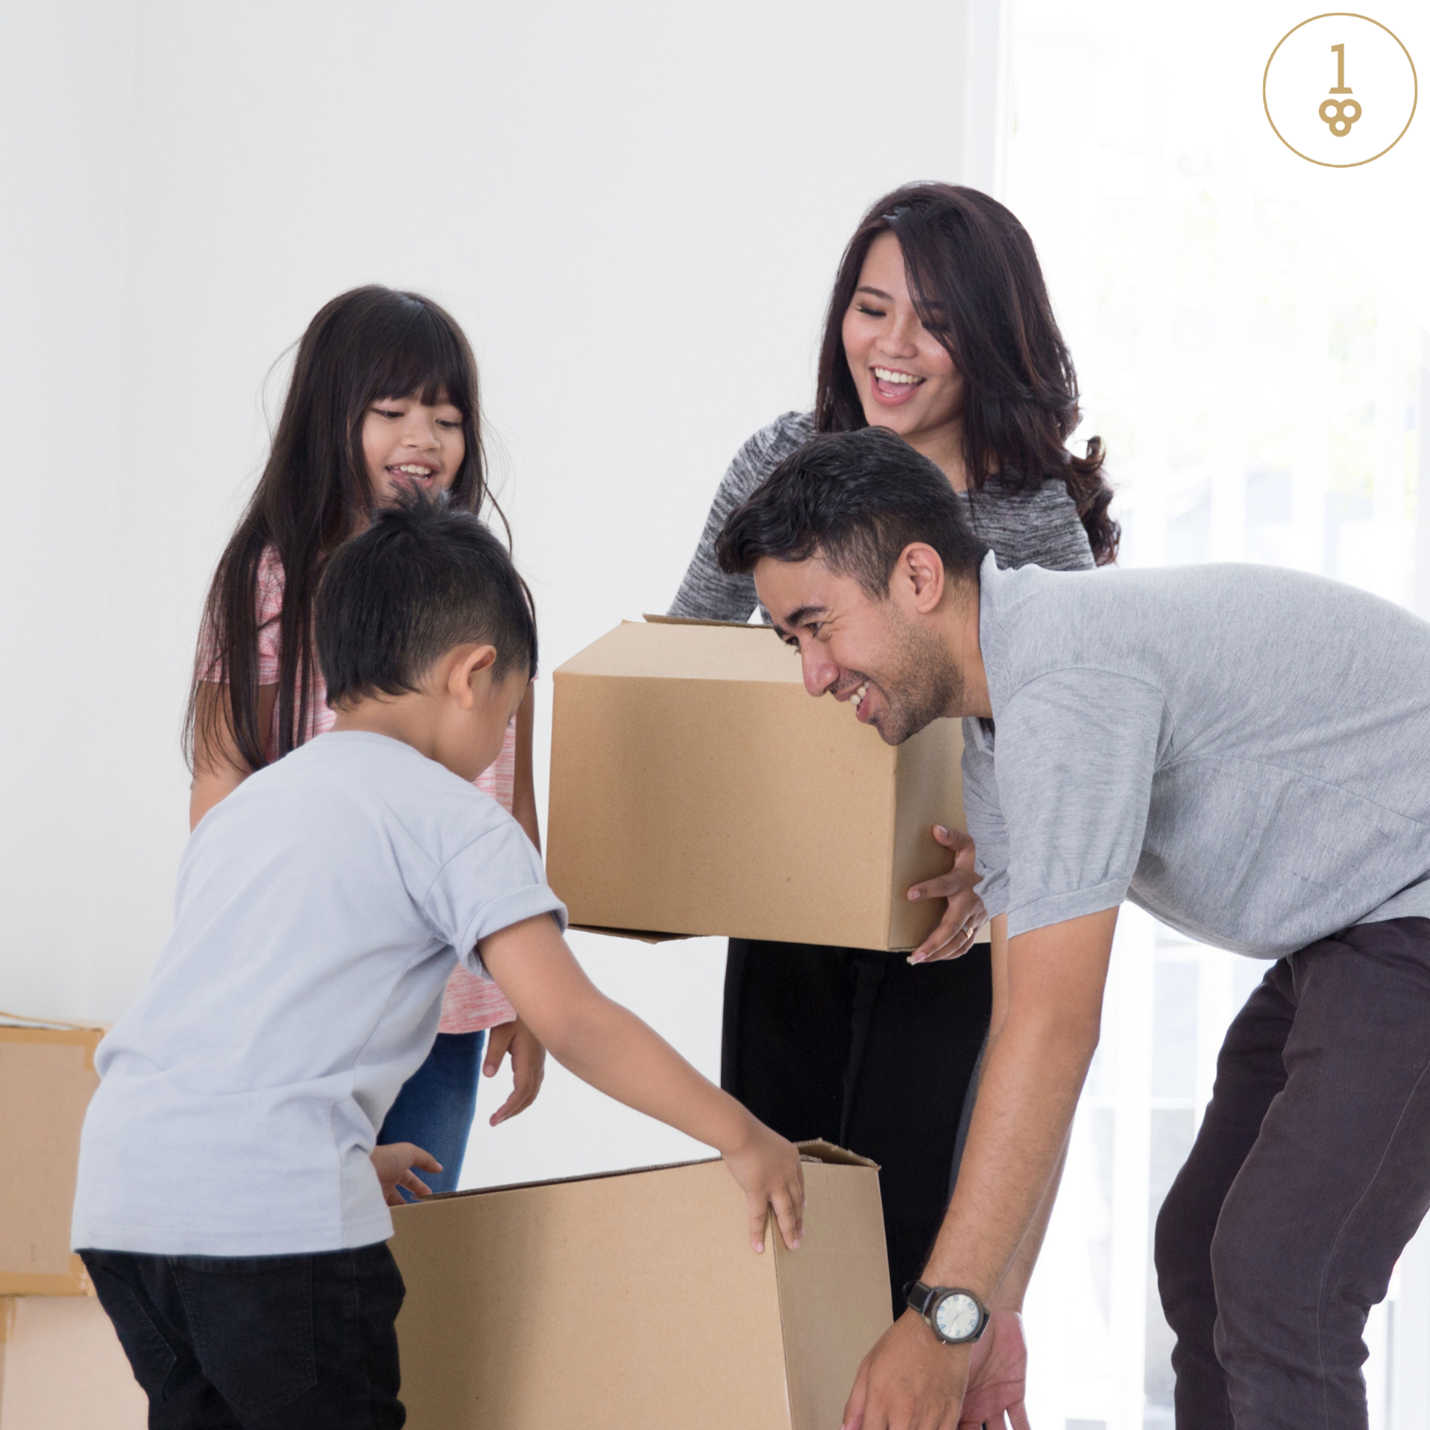 A family is moving into a new home and holding cardboard boxes.